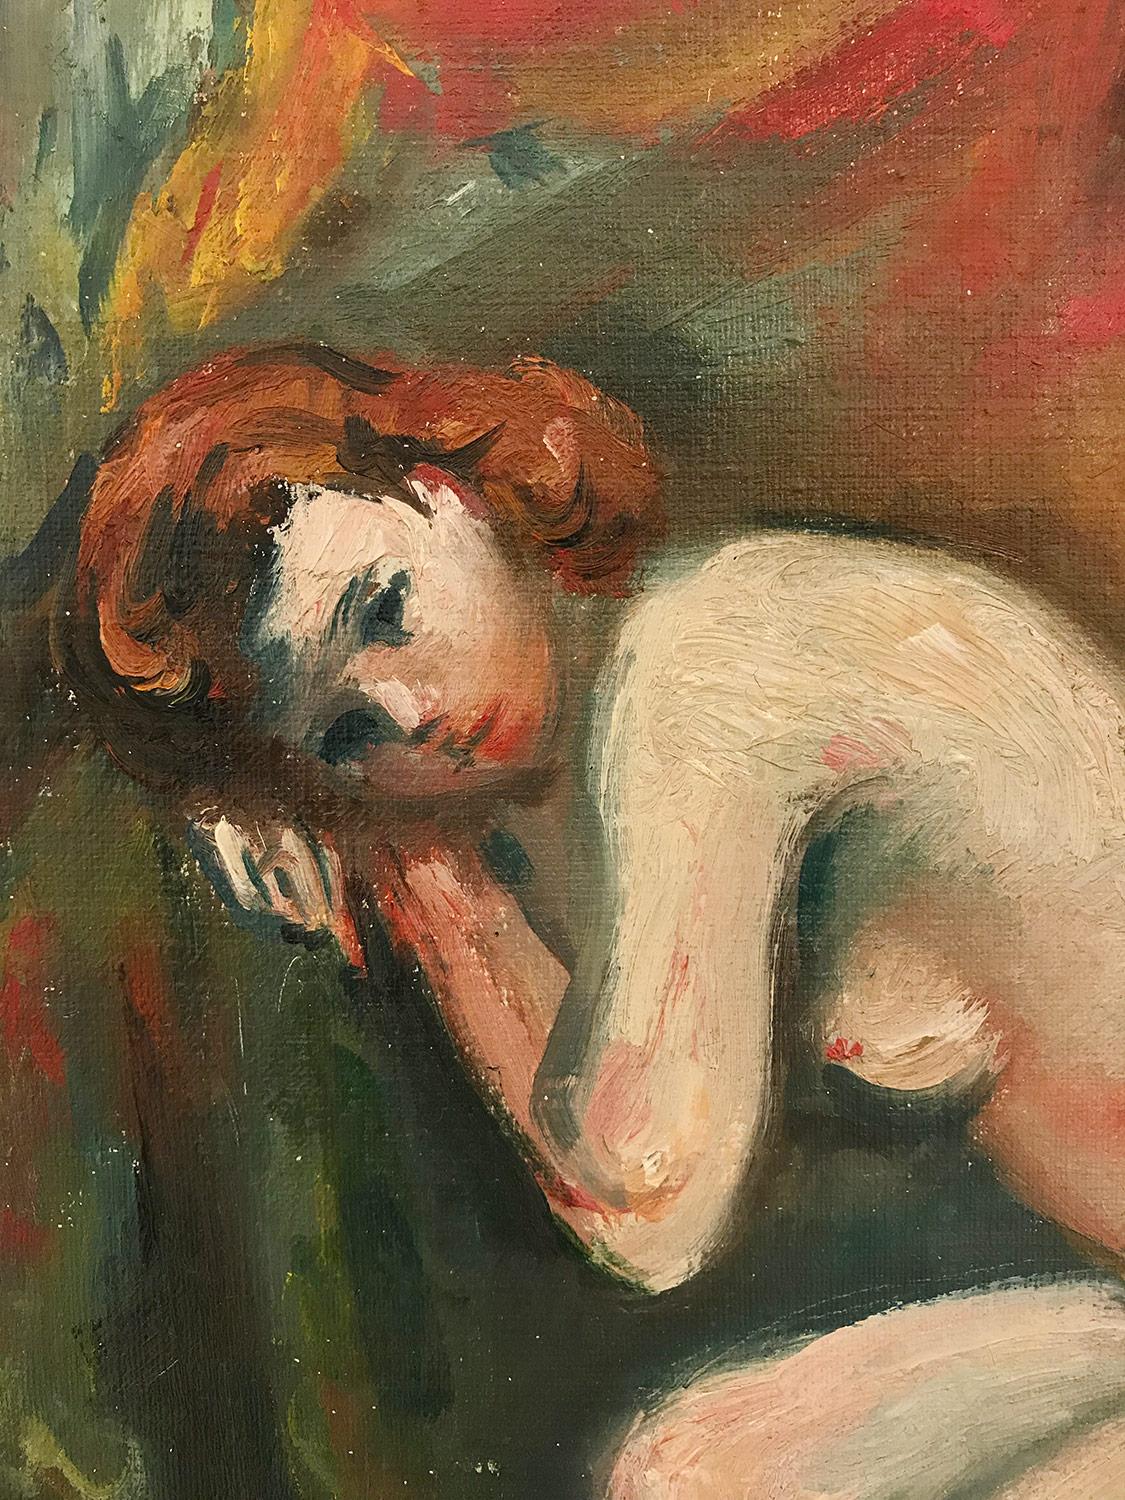 An outstanding oil painting depicting a nude portrait reclined in the artist studio. The subtle tones and bright pops of colors are what makes this piece so attractive and desirable. Done in a highly impressionistic manner with unique colors and